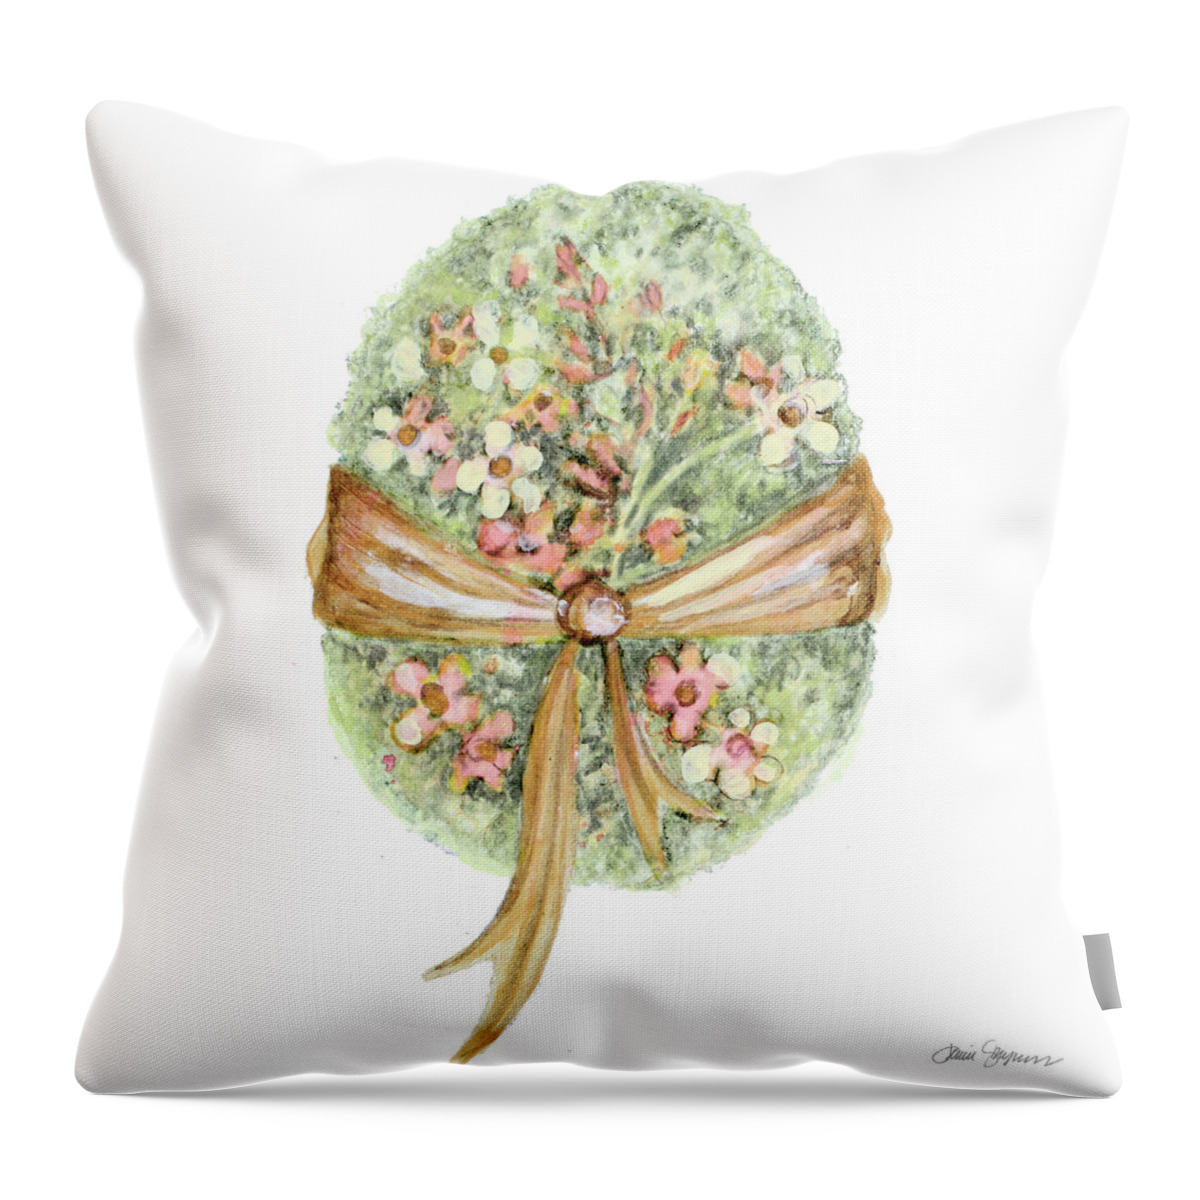 Floral Throw Pillow featuring the mixed media Floral Easter Egg II by Janice Gaynor